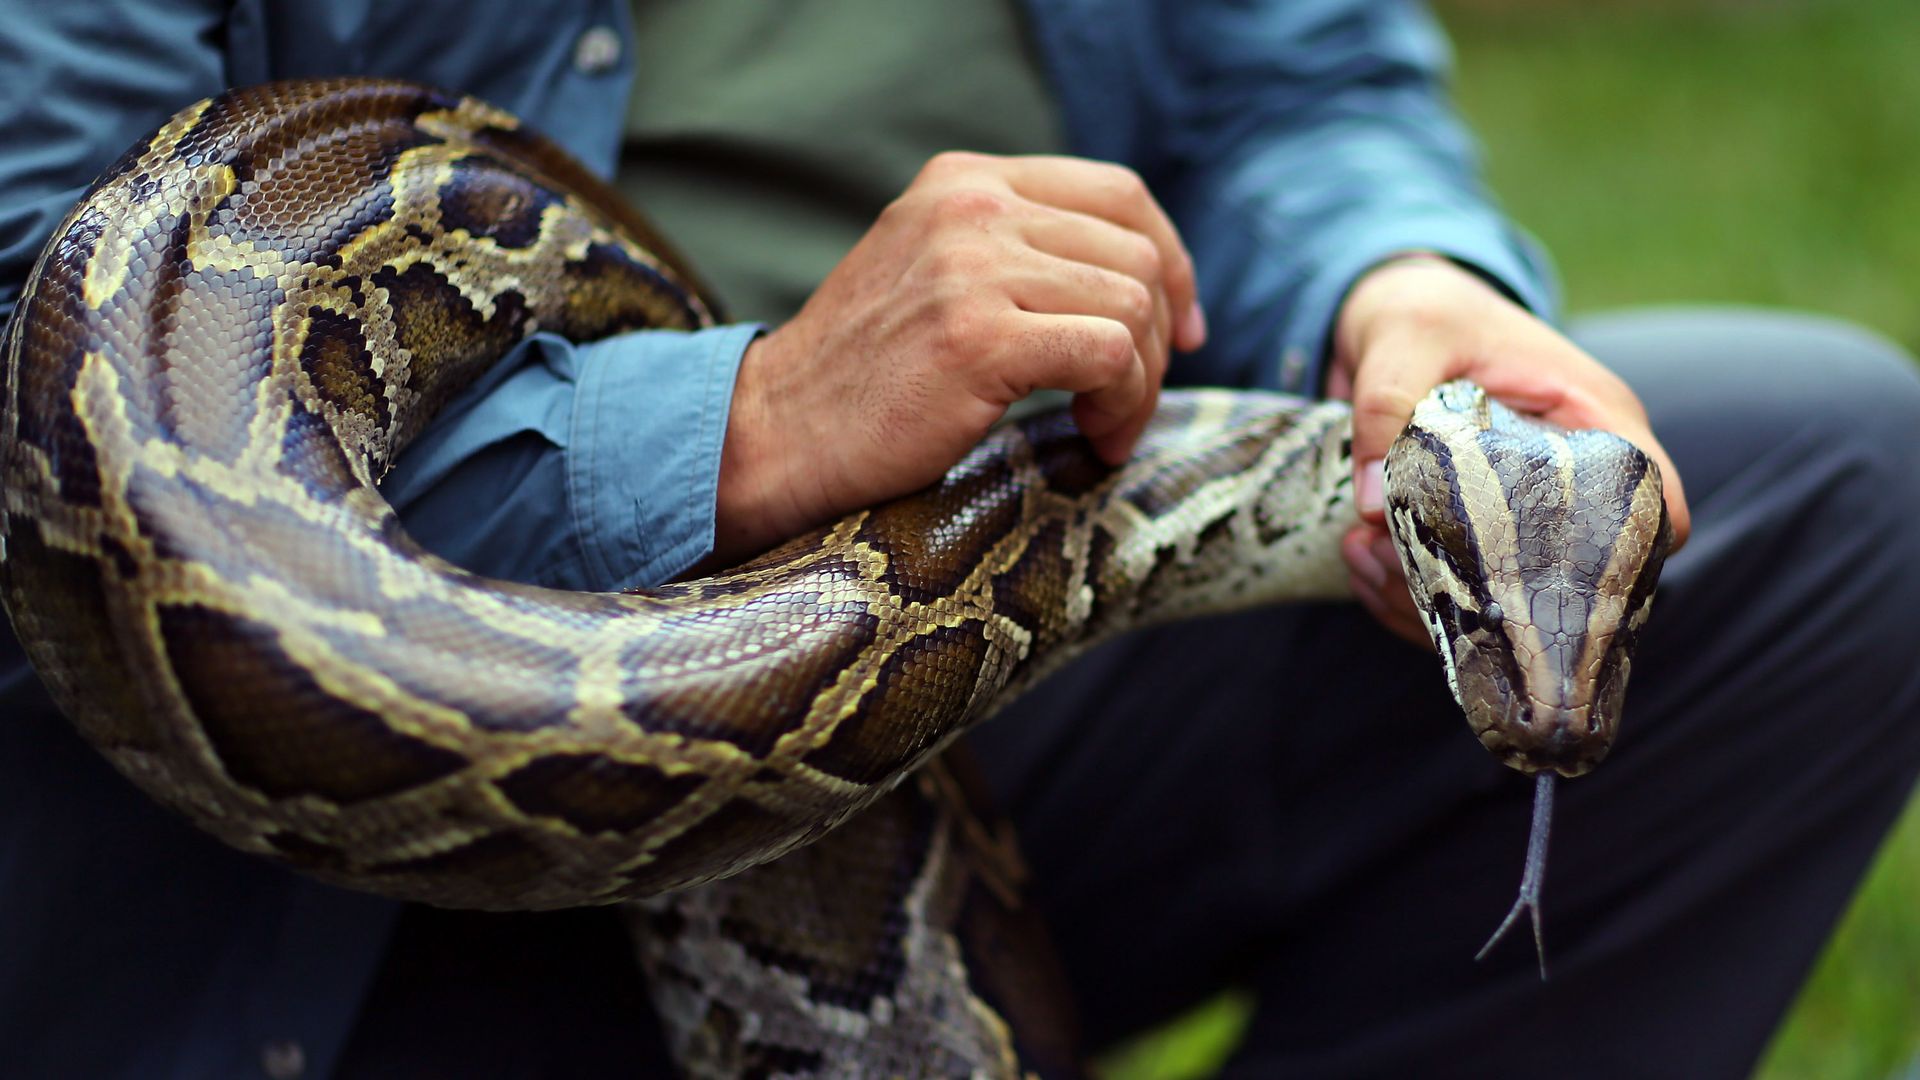  JANUARY 12: A Burmese python is held by Jeff Fobb as he speaks to the media at the registration event and press conference for the start of the 2013 Python Challenge 